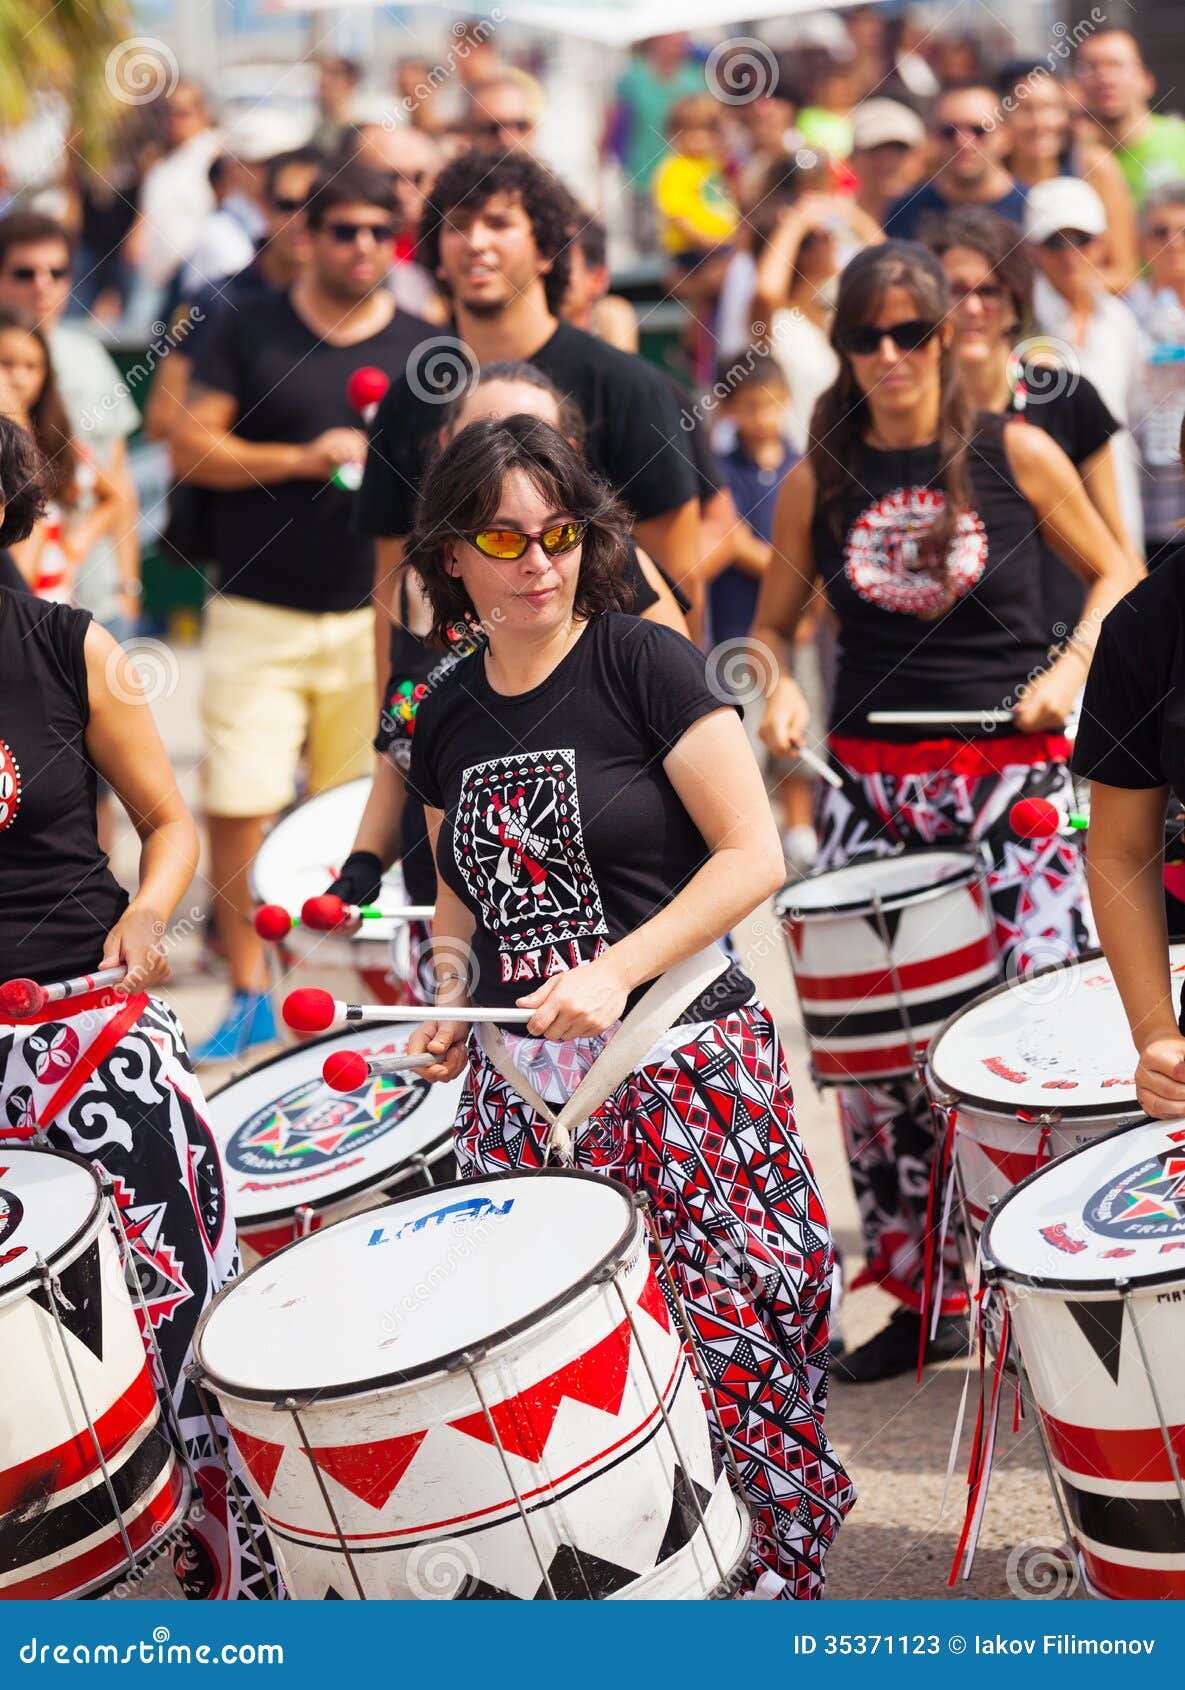 Concert of Batala drummers editorial stock photo. Image of performance ...